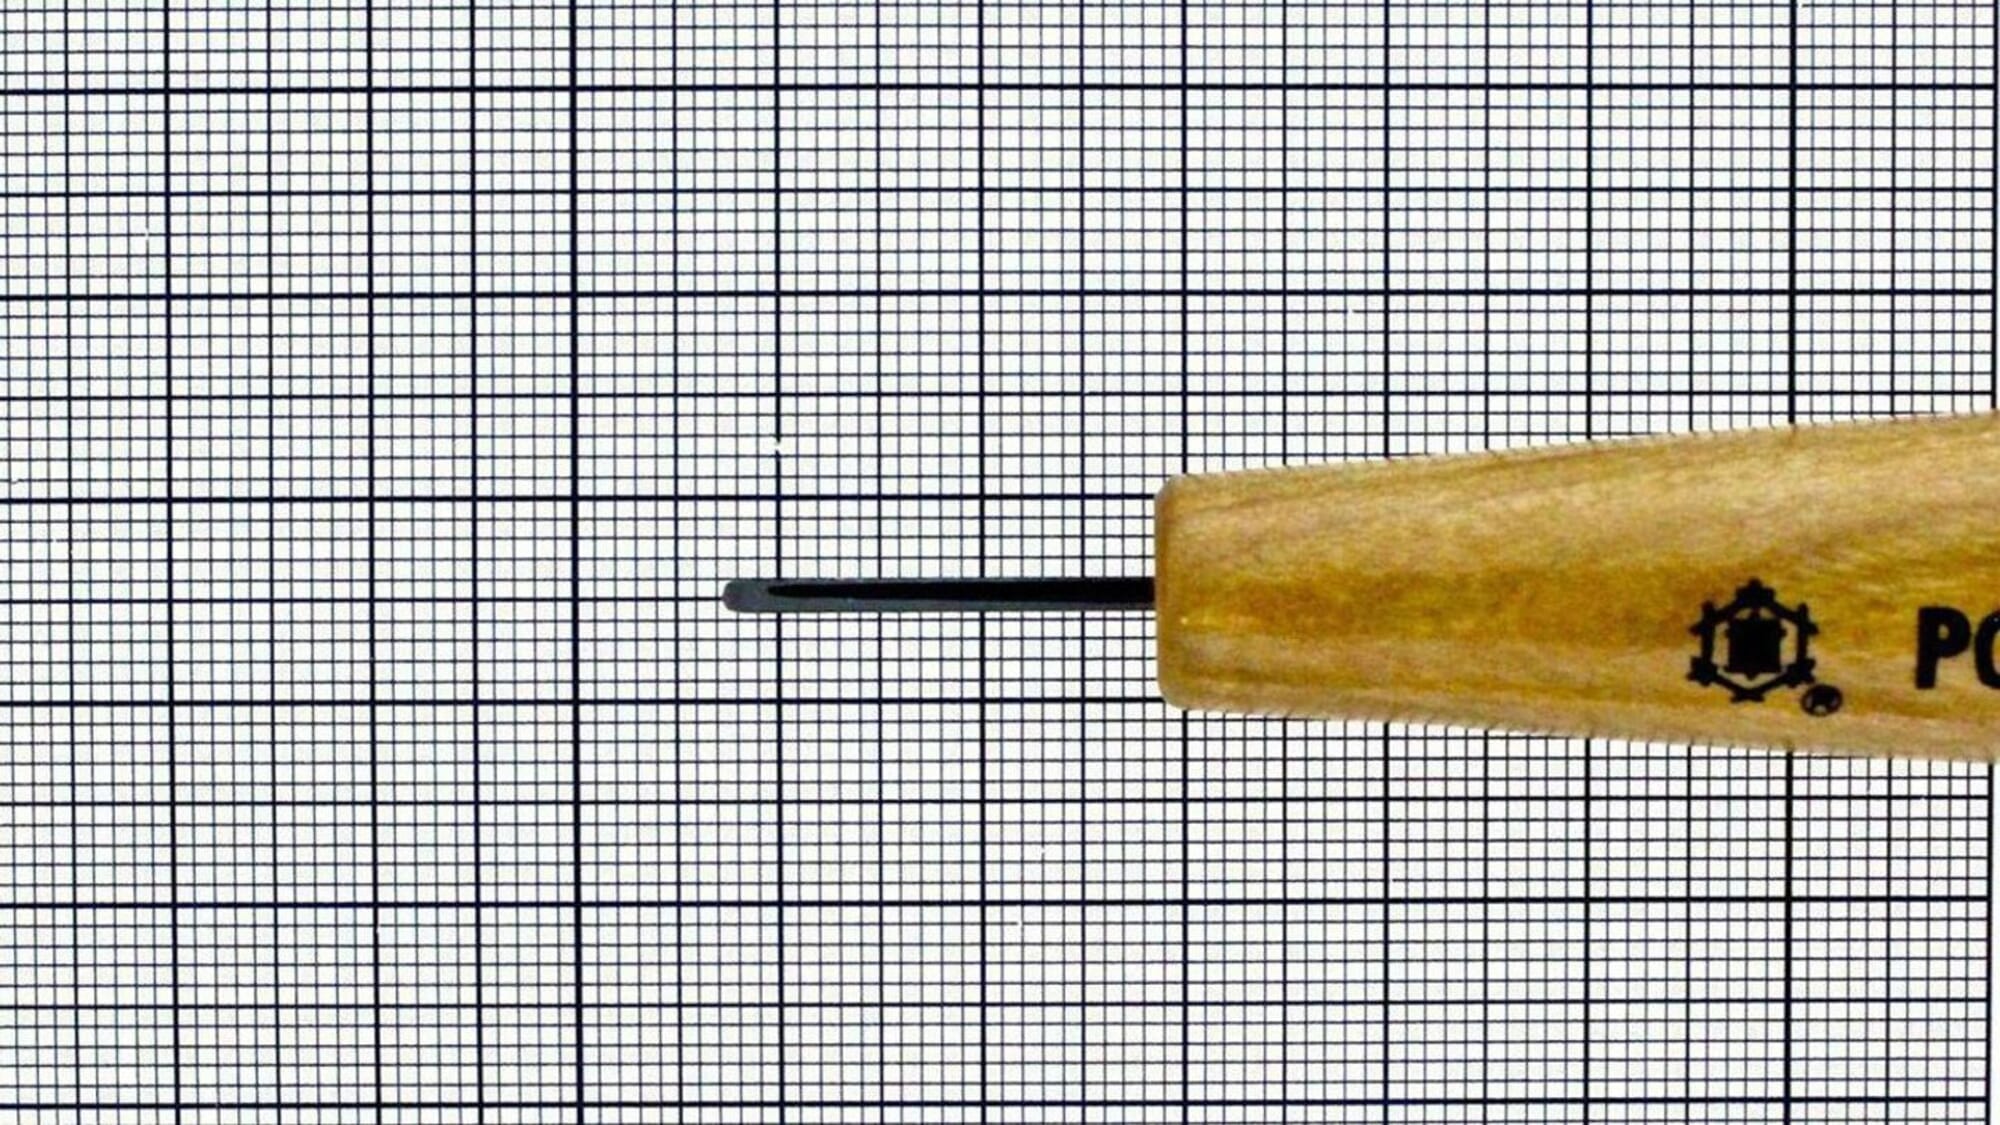 Mikisyo Power Grip Japanese PMC & Wood Carving Chisel Tool 4.5mm